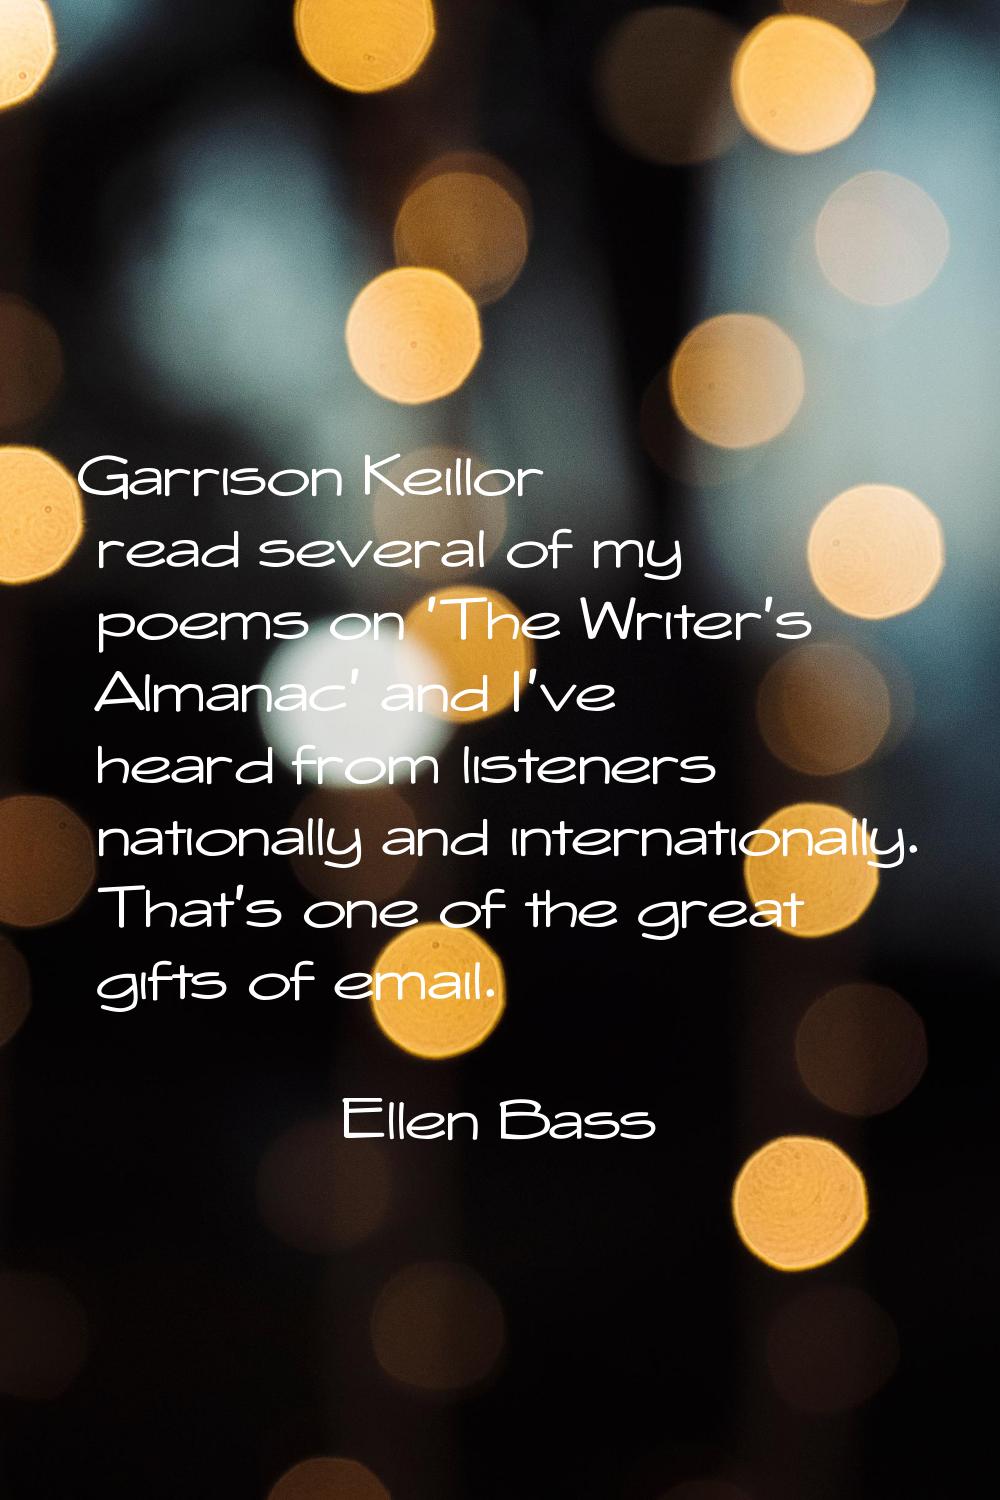 Garrison Keillor read several of my poems on 'The Writer's Almanac' and I've heard from listeners n